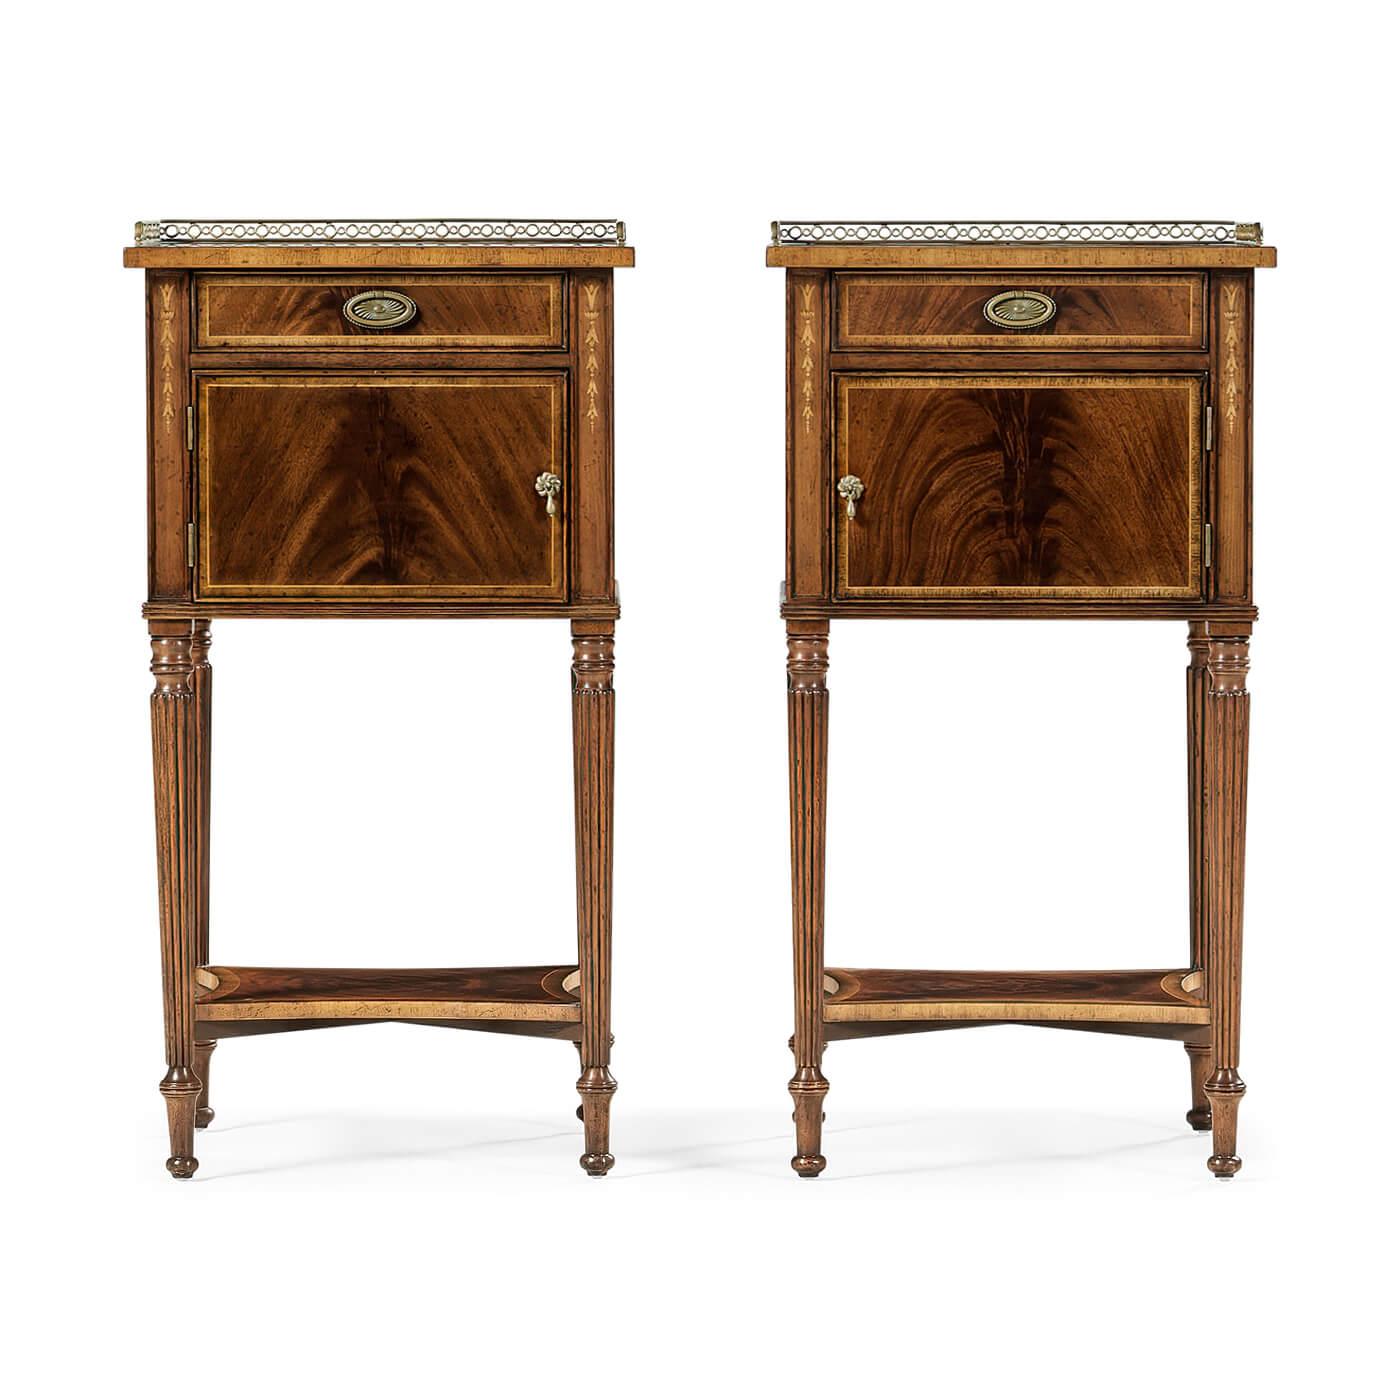 Pair of Regency style mahogany veneered and crossbanded bedside cabinets with a pierced patinated brass rail, single drawer and cupboard, and raised under-tier. Tapering fluted legs and fine floral marquetry work to the paneled uprights.